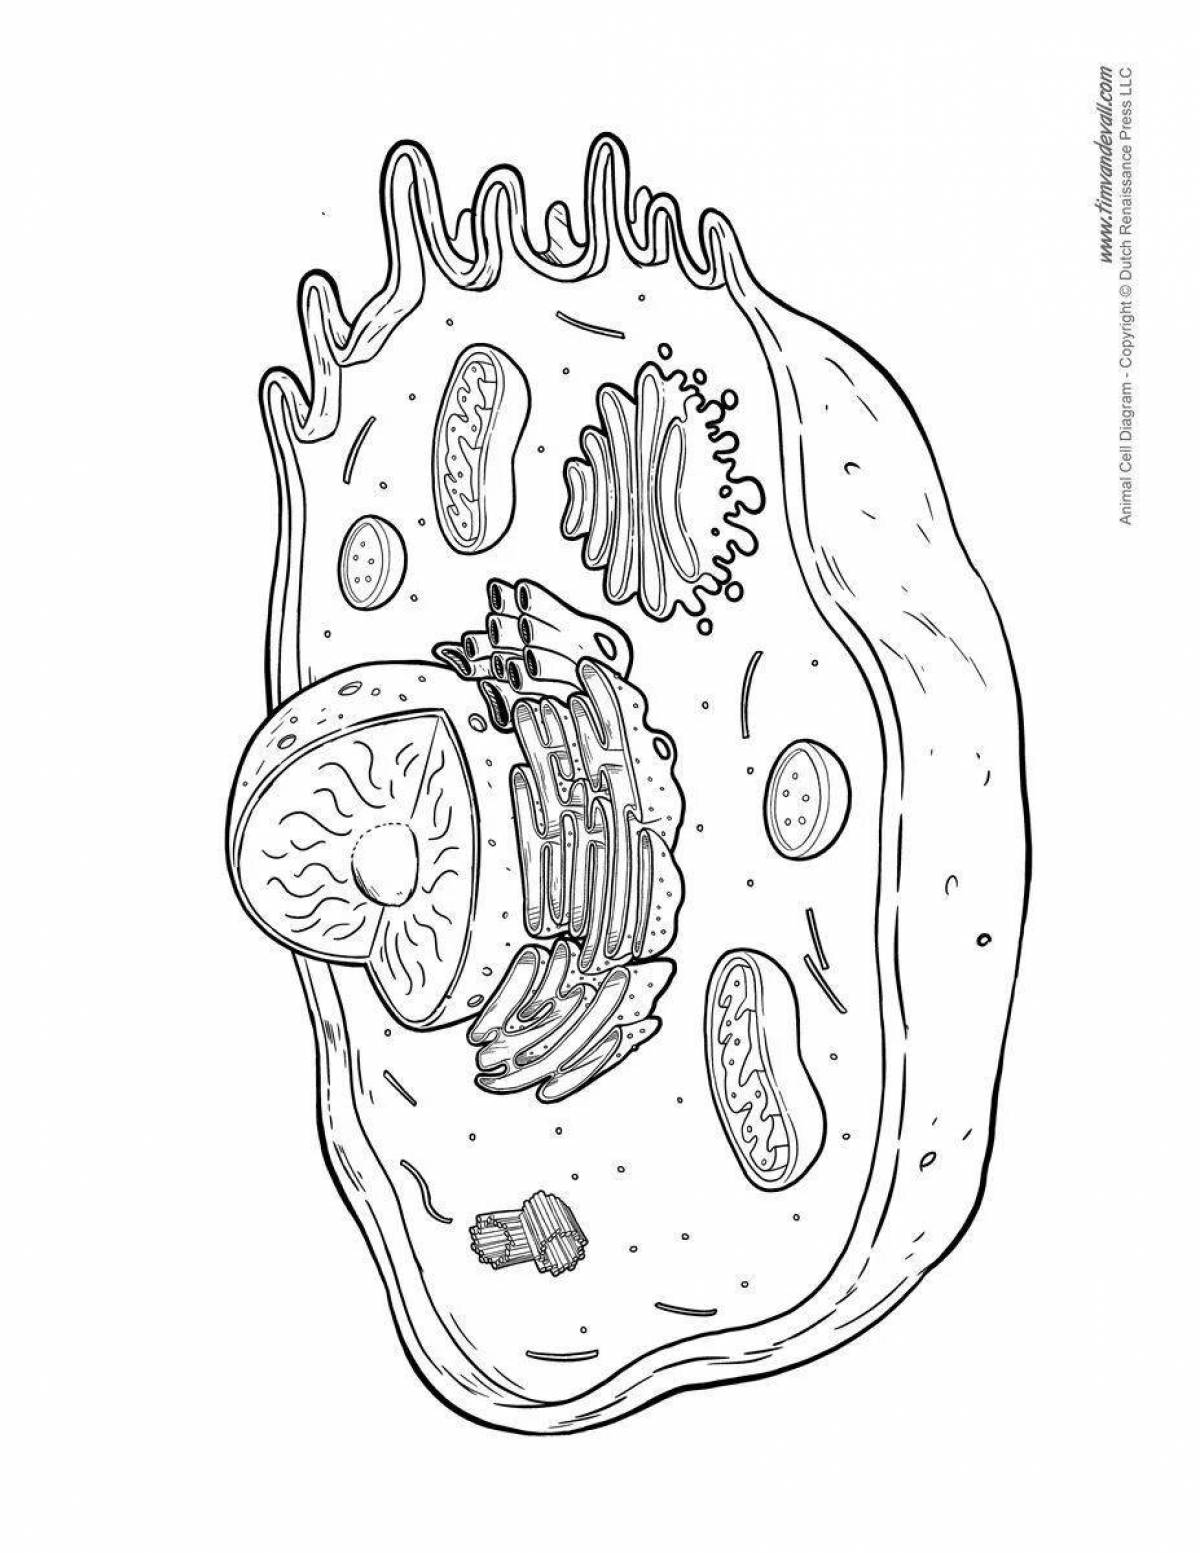 Awesome plant cell structure coloring page